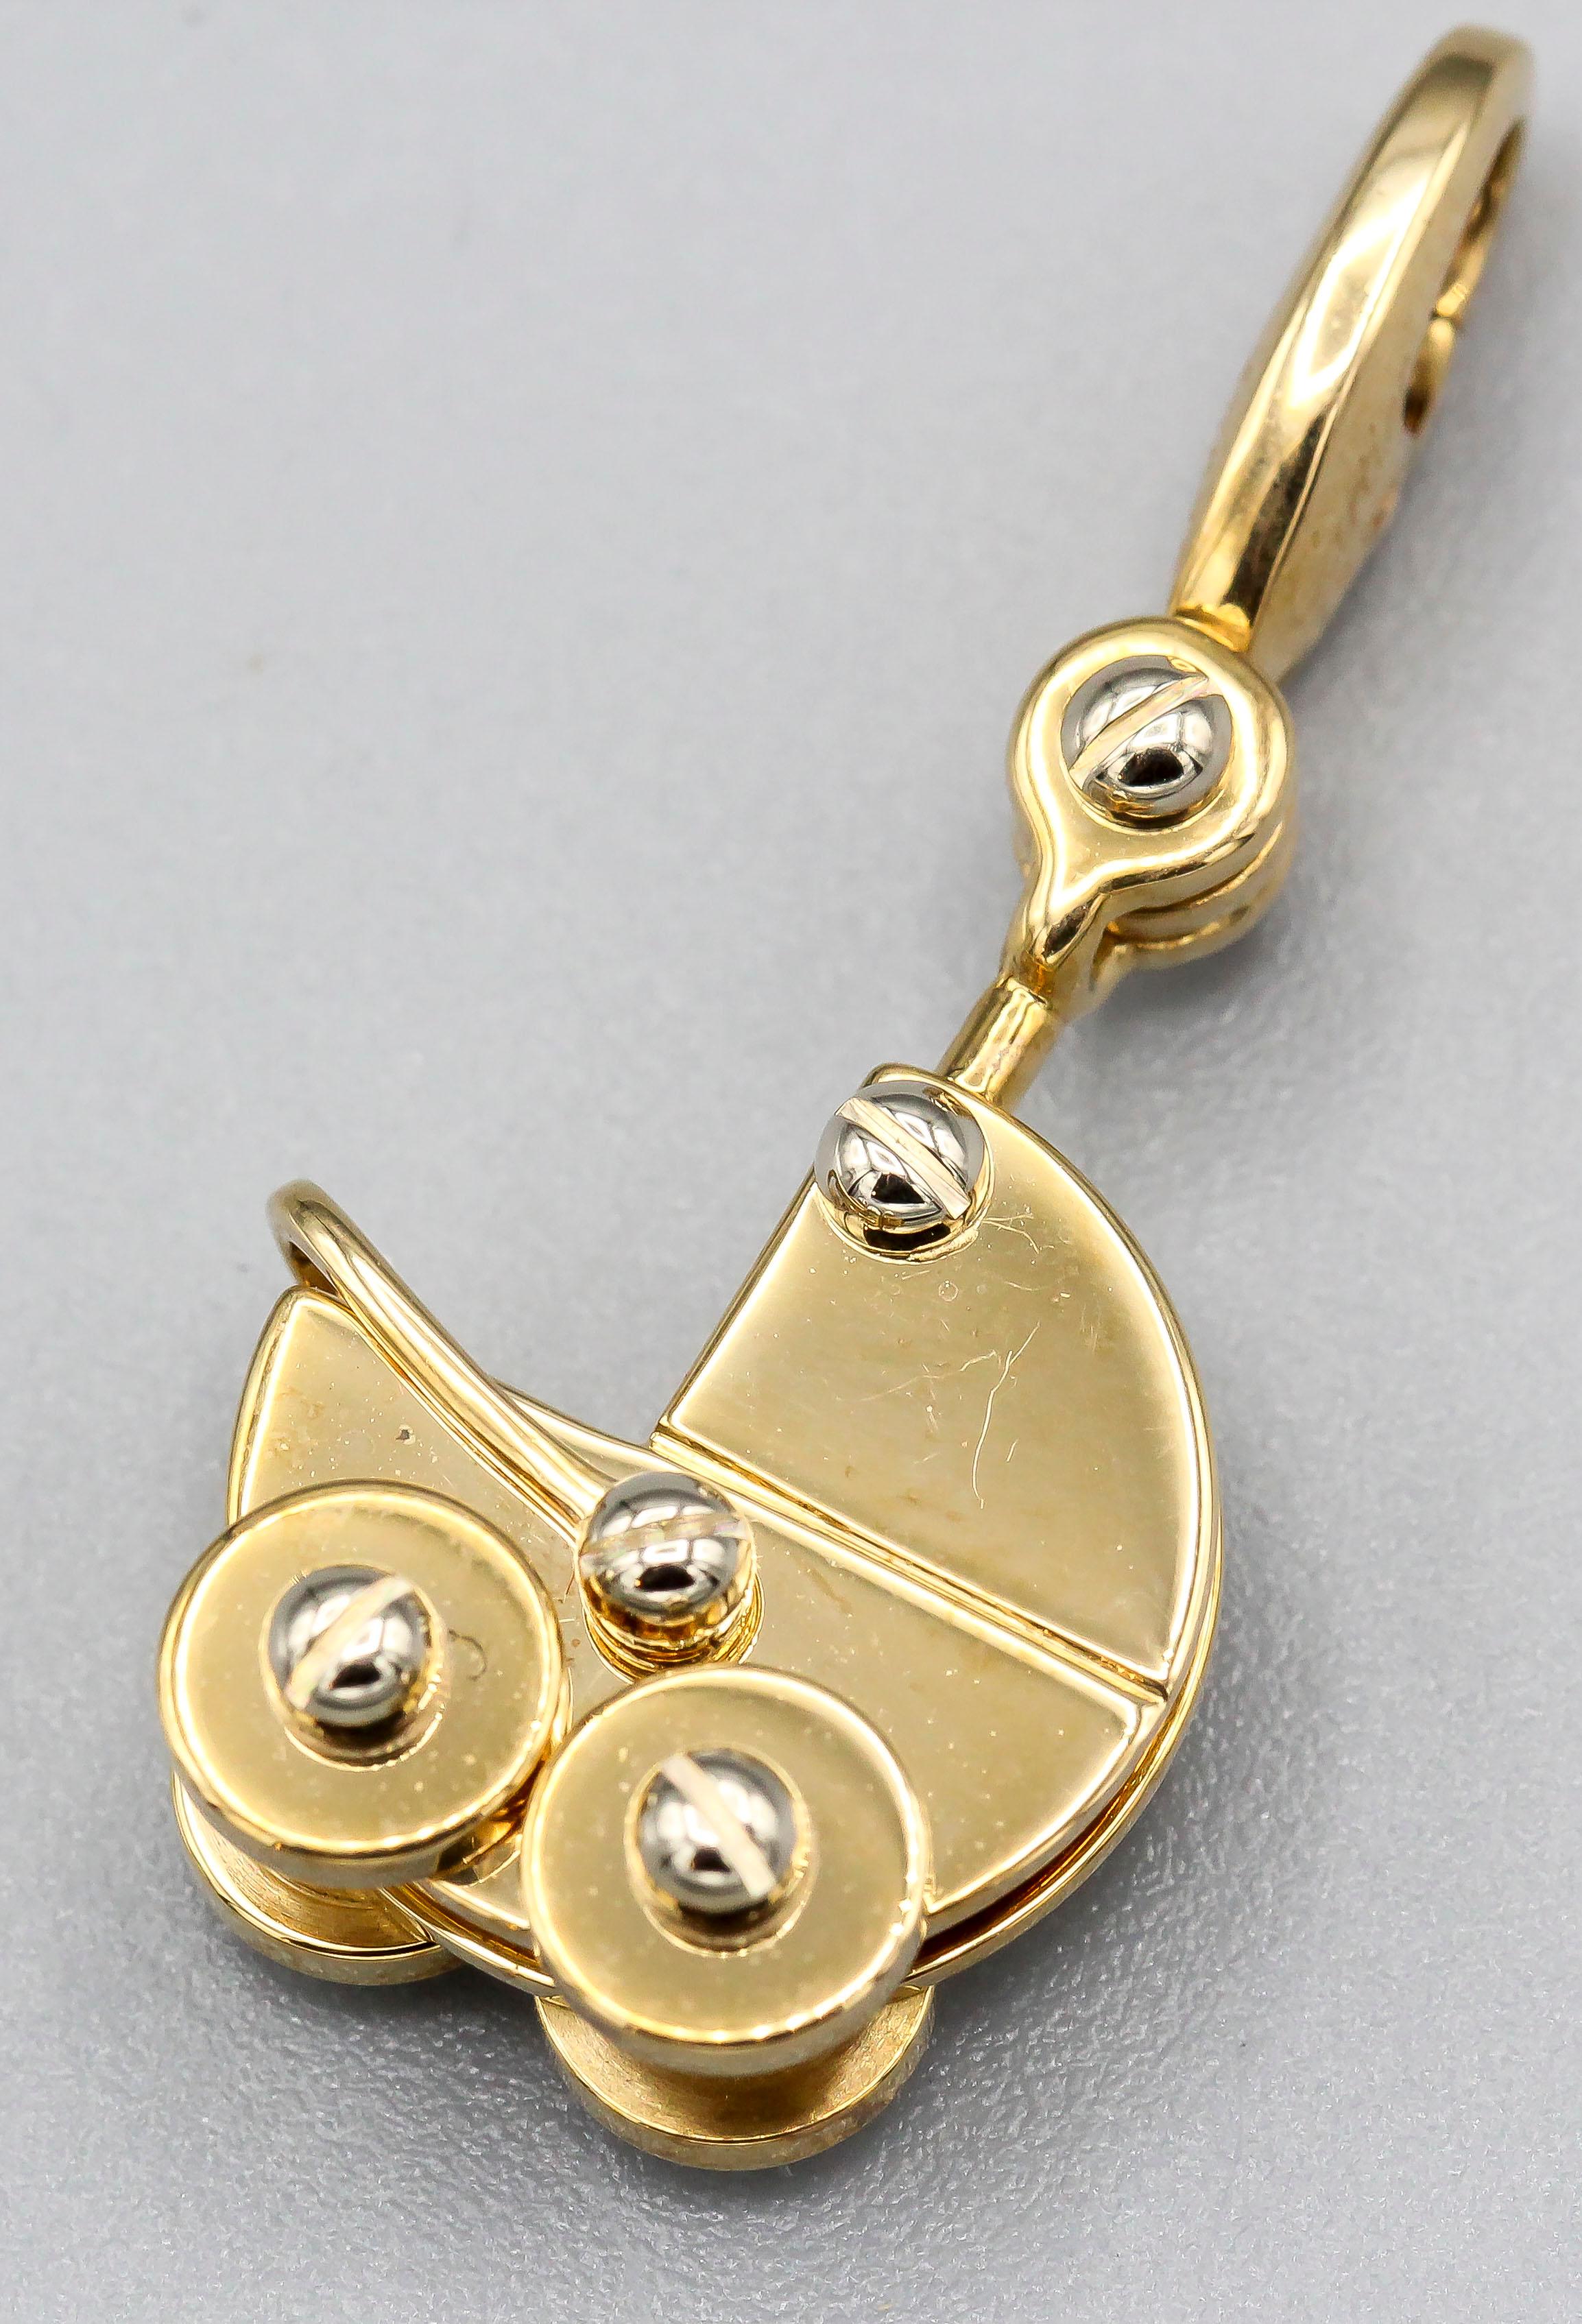 Fine 18K white and yellow gold charm pendant by Cartier. It resembles a baby carriage, which white gold accents.

Hallmarks: Cartier, 750, reference numbers, copyright, 2000.